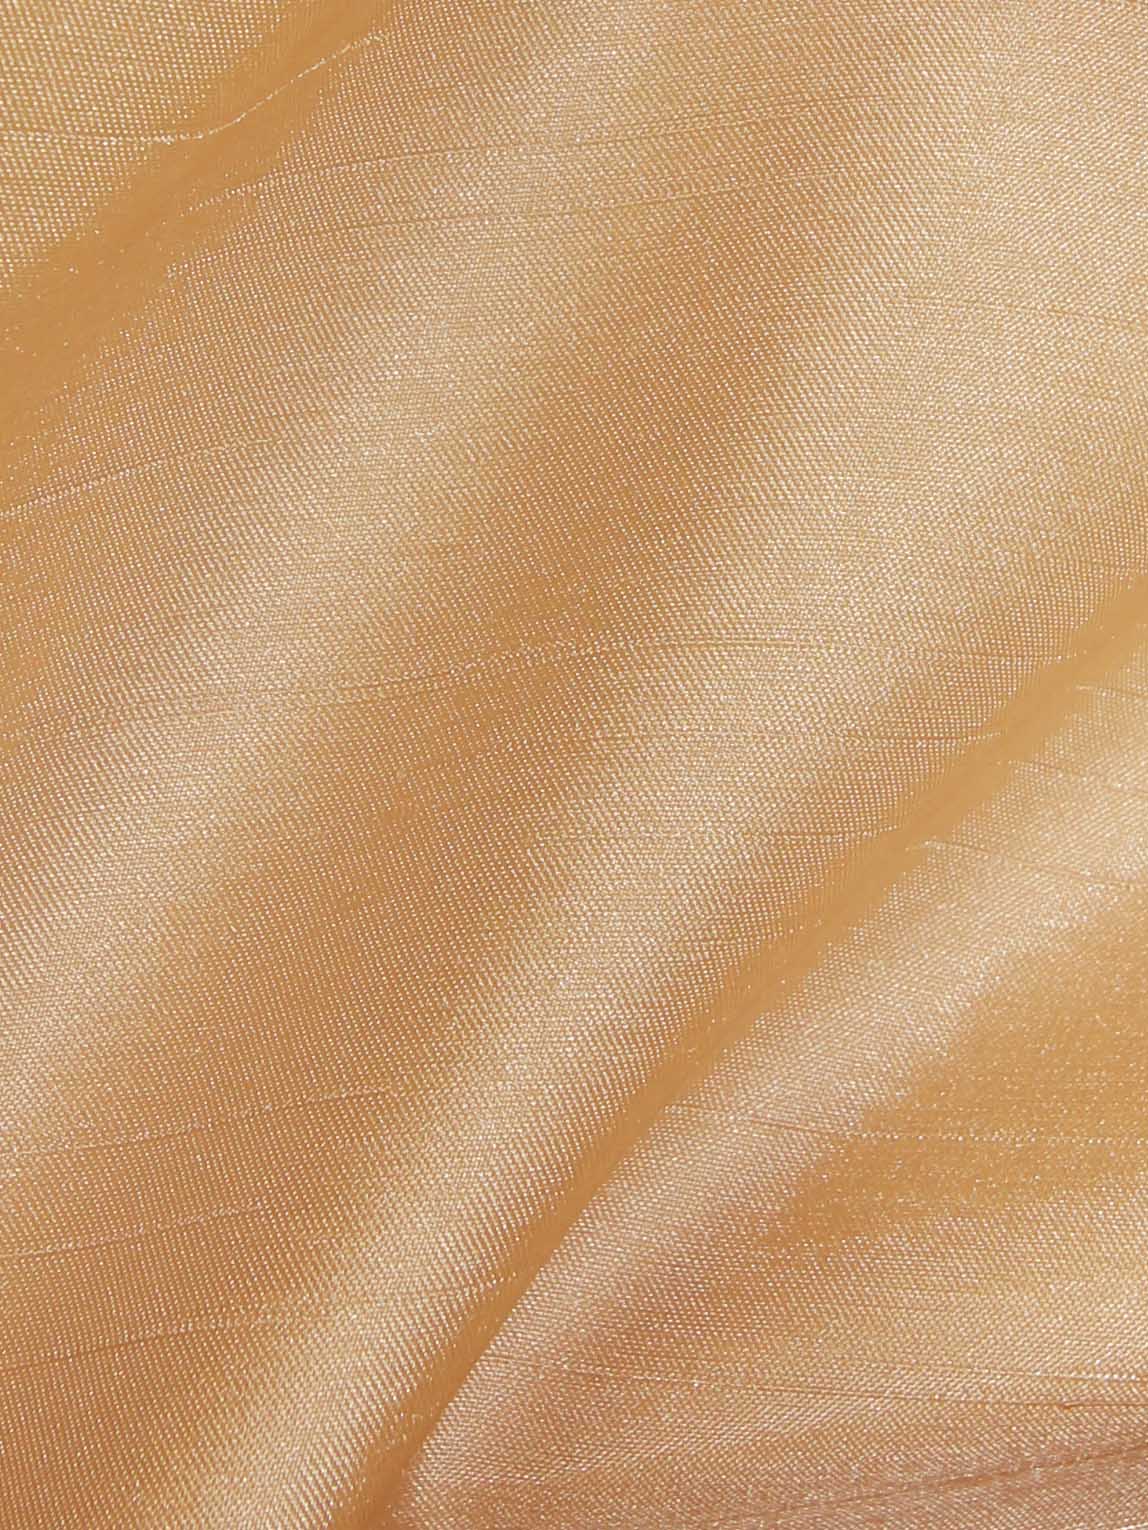 Champagne Polyester Satin Backed Dupion - Clarity